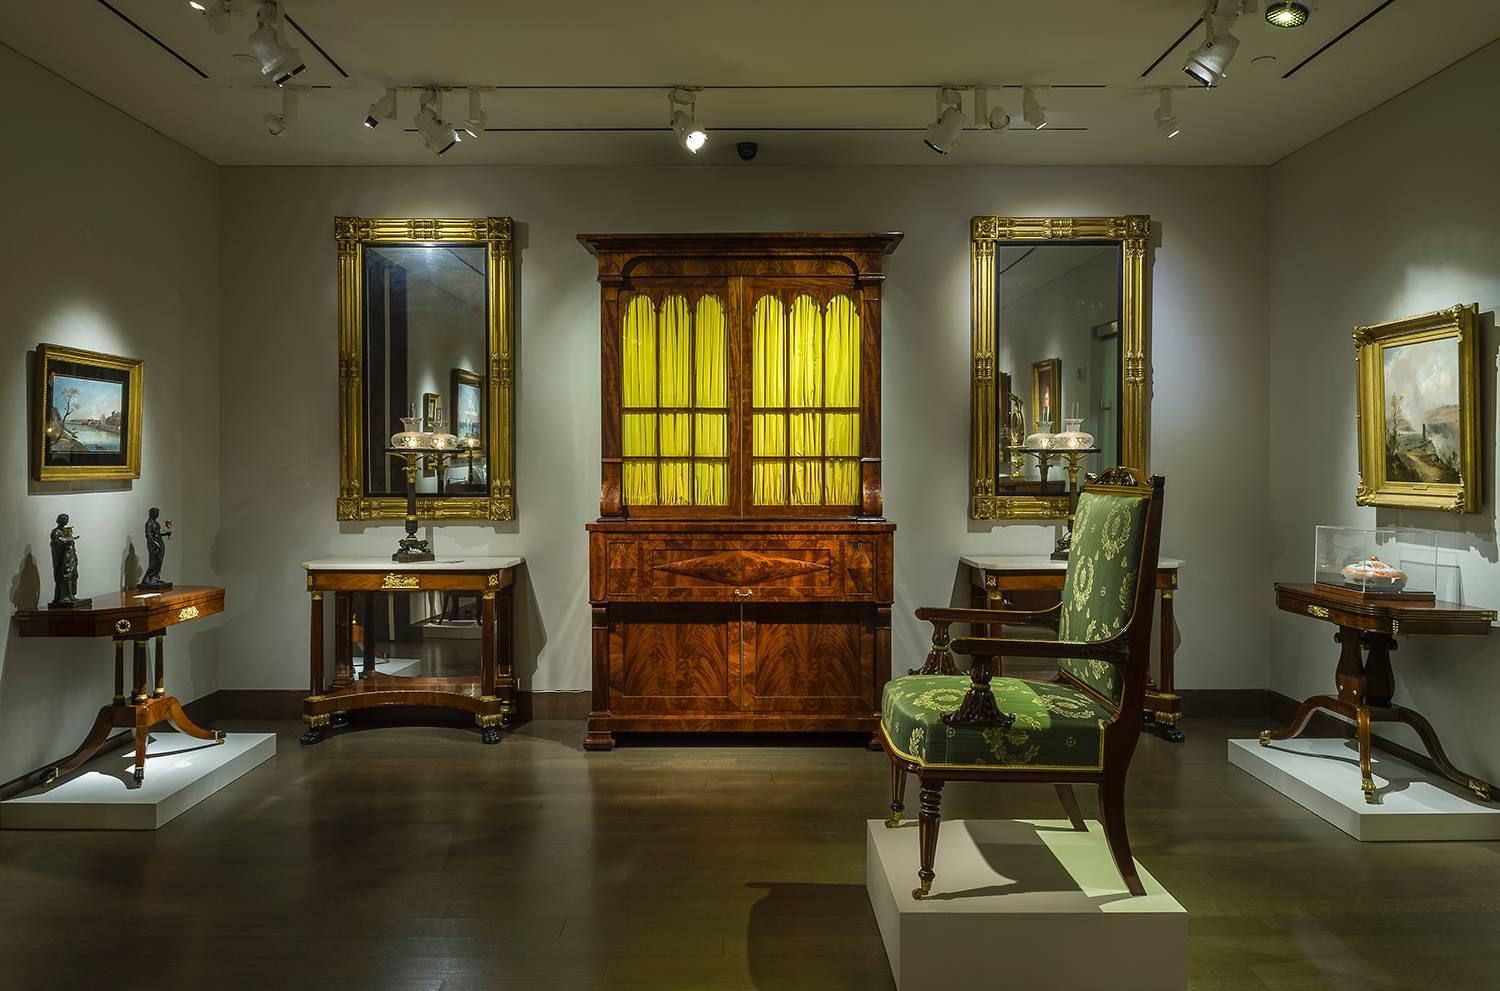 Boston, Massachusetts, about 1820
Eastern white pine, gessoed and gilded, with ebonized liners and mirror
Each, 65 1/8 in. high; 37 1/2 in. wide
Inscribed (on back of frame and backboard of each): Top

This pair of mirrors is identical to a